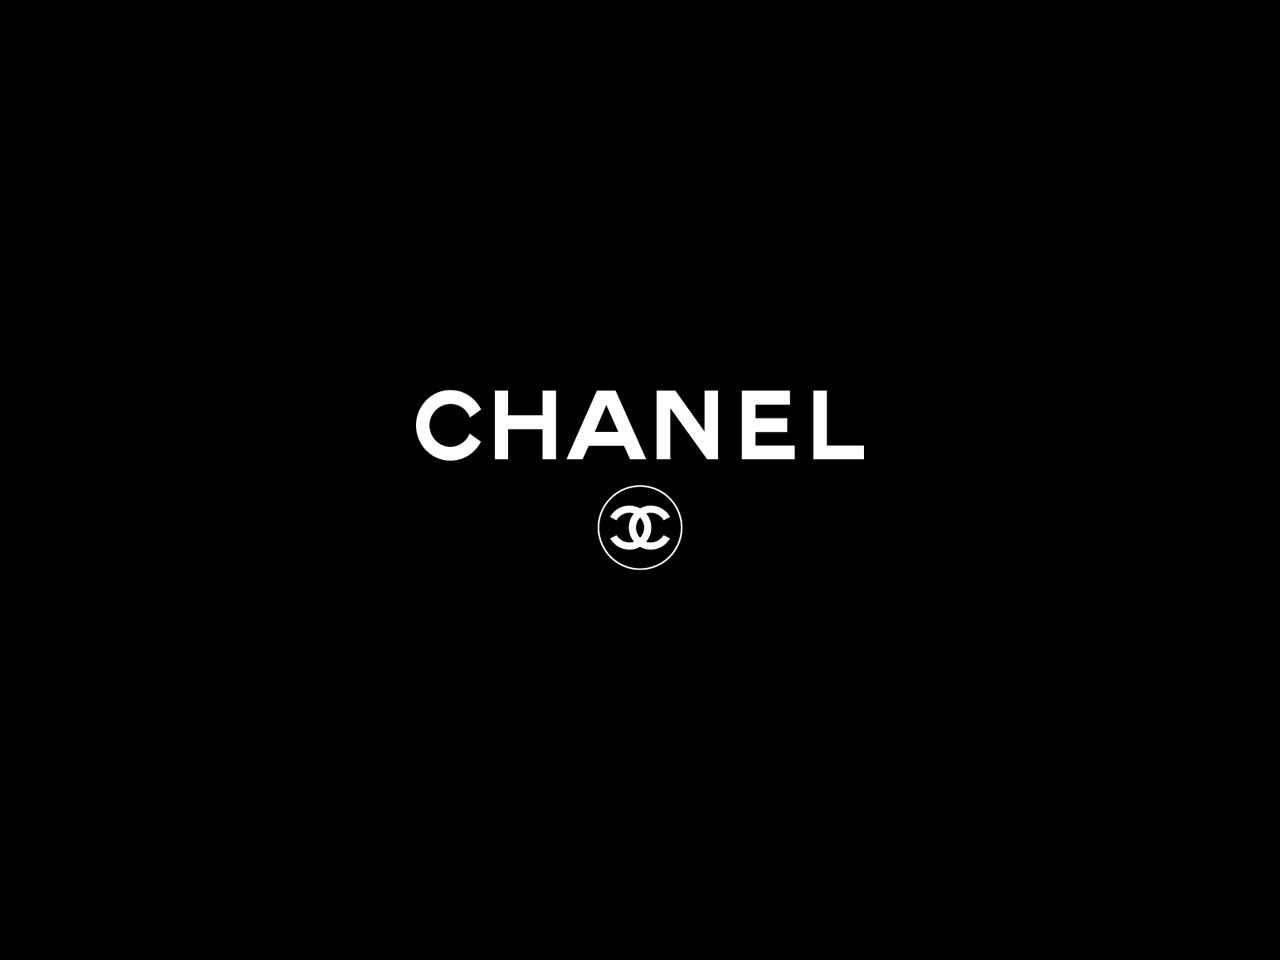 Free Download Chanel Wallpaper High Definition Wallpapers 24 Wallpapers 1280x960 For Your Desktop Mobile Tablet Explore 45 Best High Definition Wallpaper Super High Definition Wallpaper High Definition Wallpapers 1080p